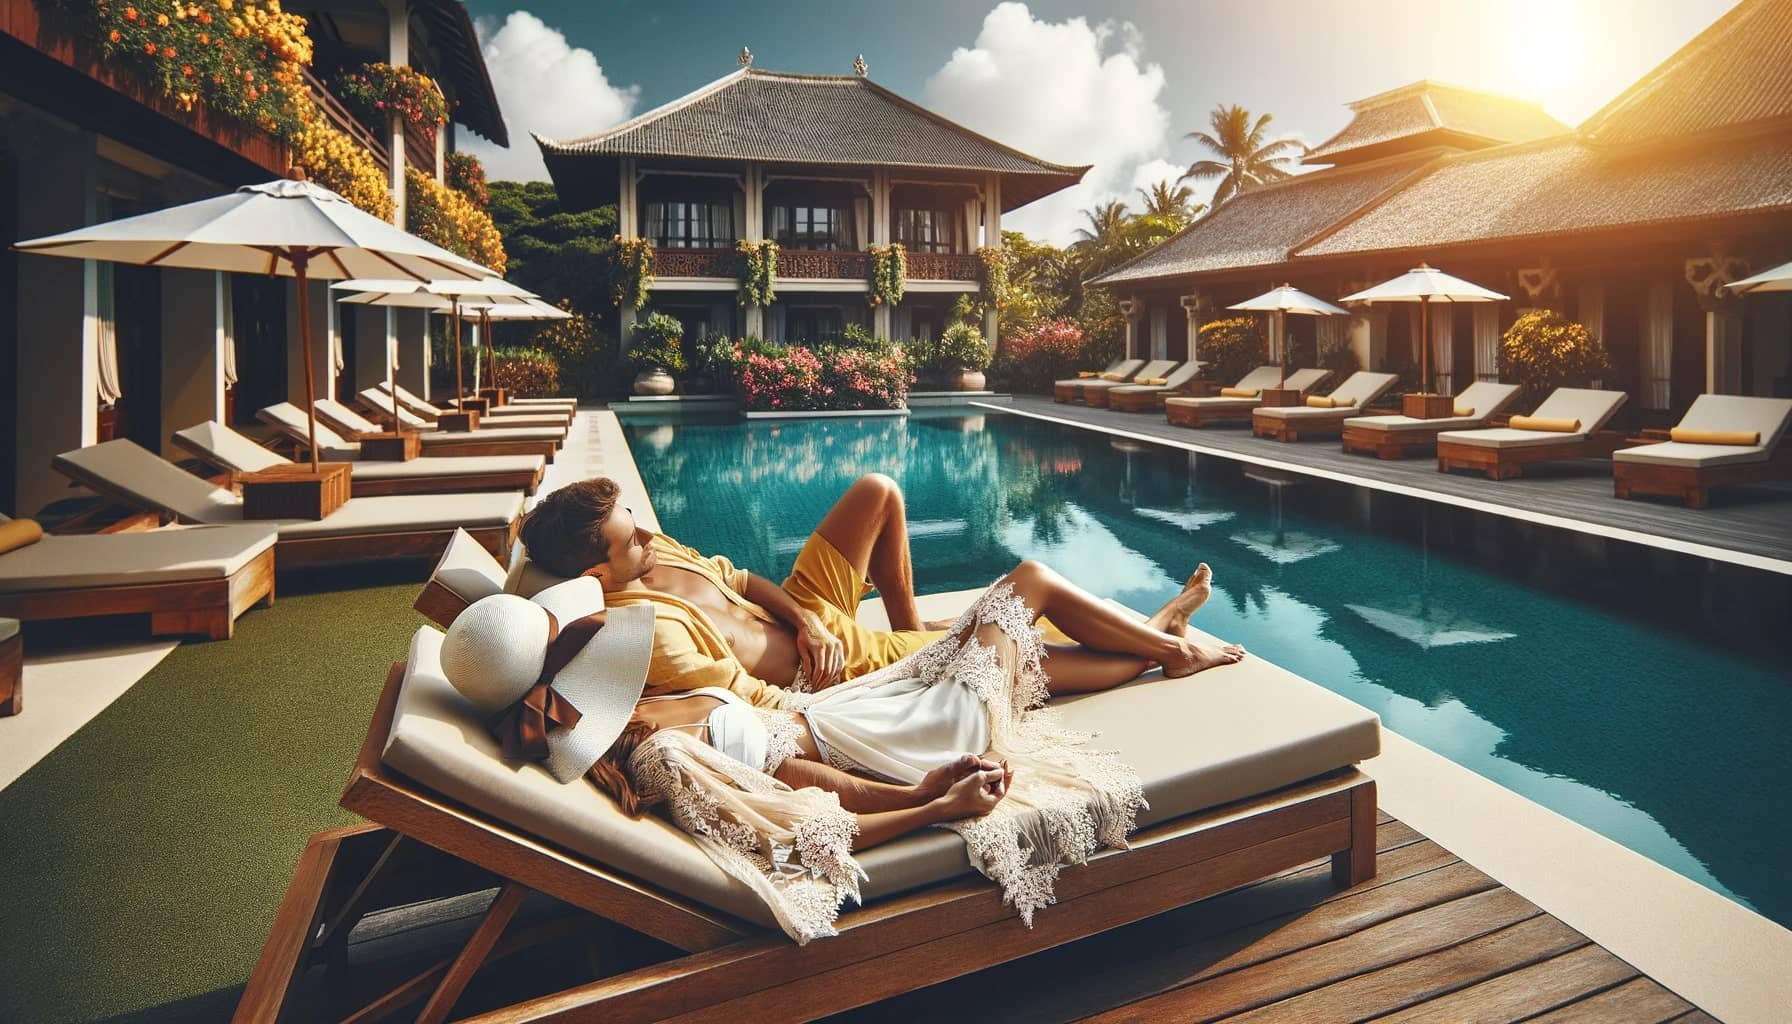 couple relaxing on a wooden sunbed by a pool the setting is a luxurious resort with a clear blue pool